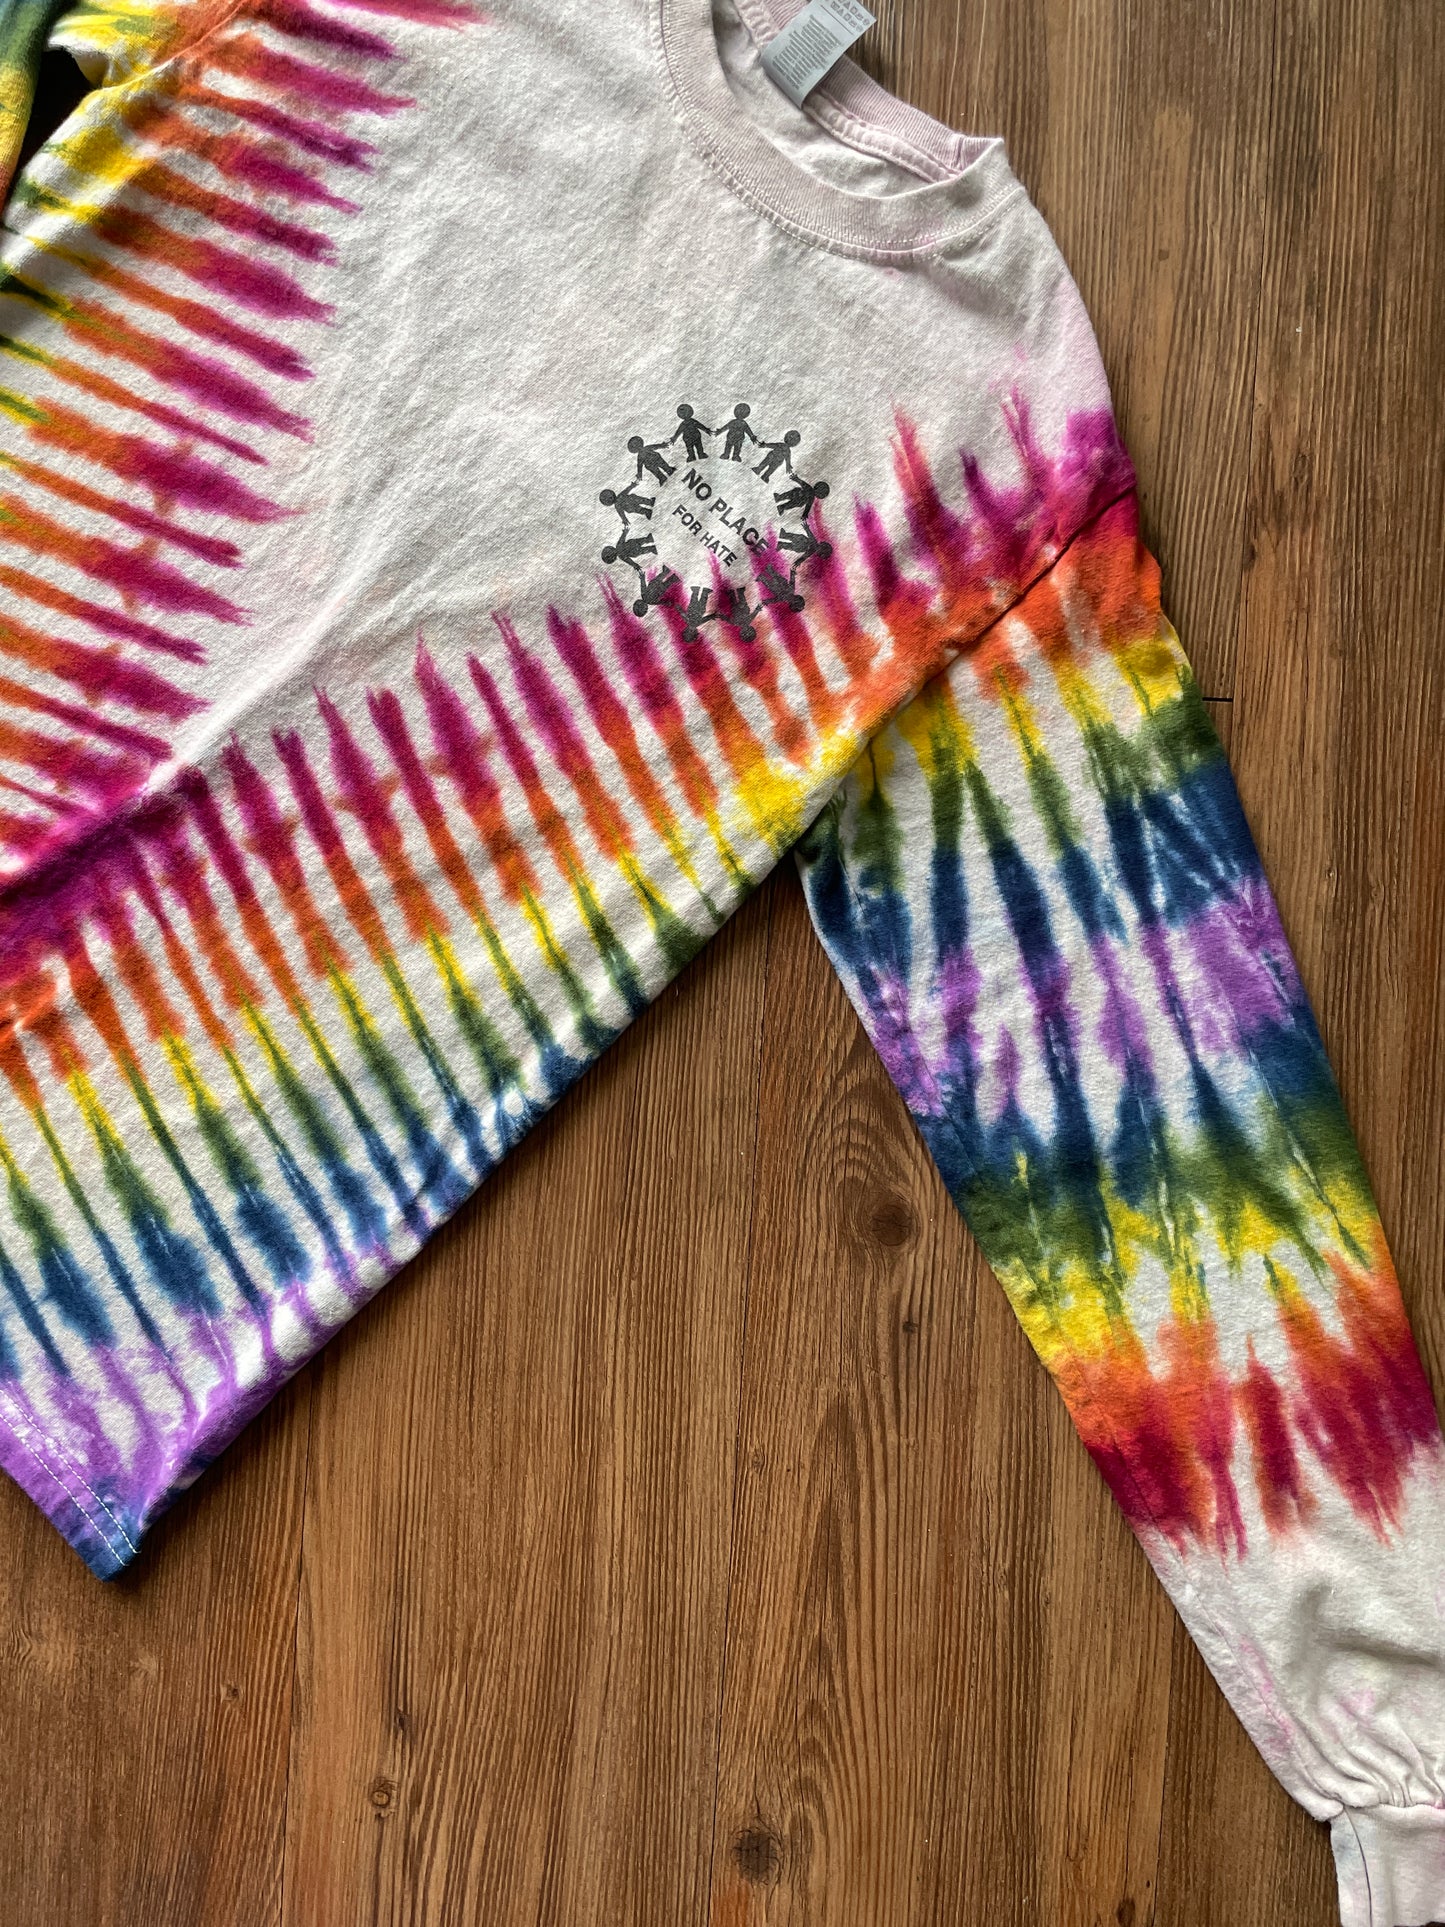 Small Men’s No Place for Hate Be Kind Handmade Tie Dye T-Shirt | Earthy Rainbow V-Pleated Tie Dye Long Sleeve